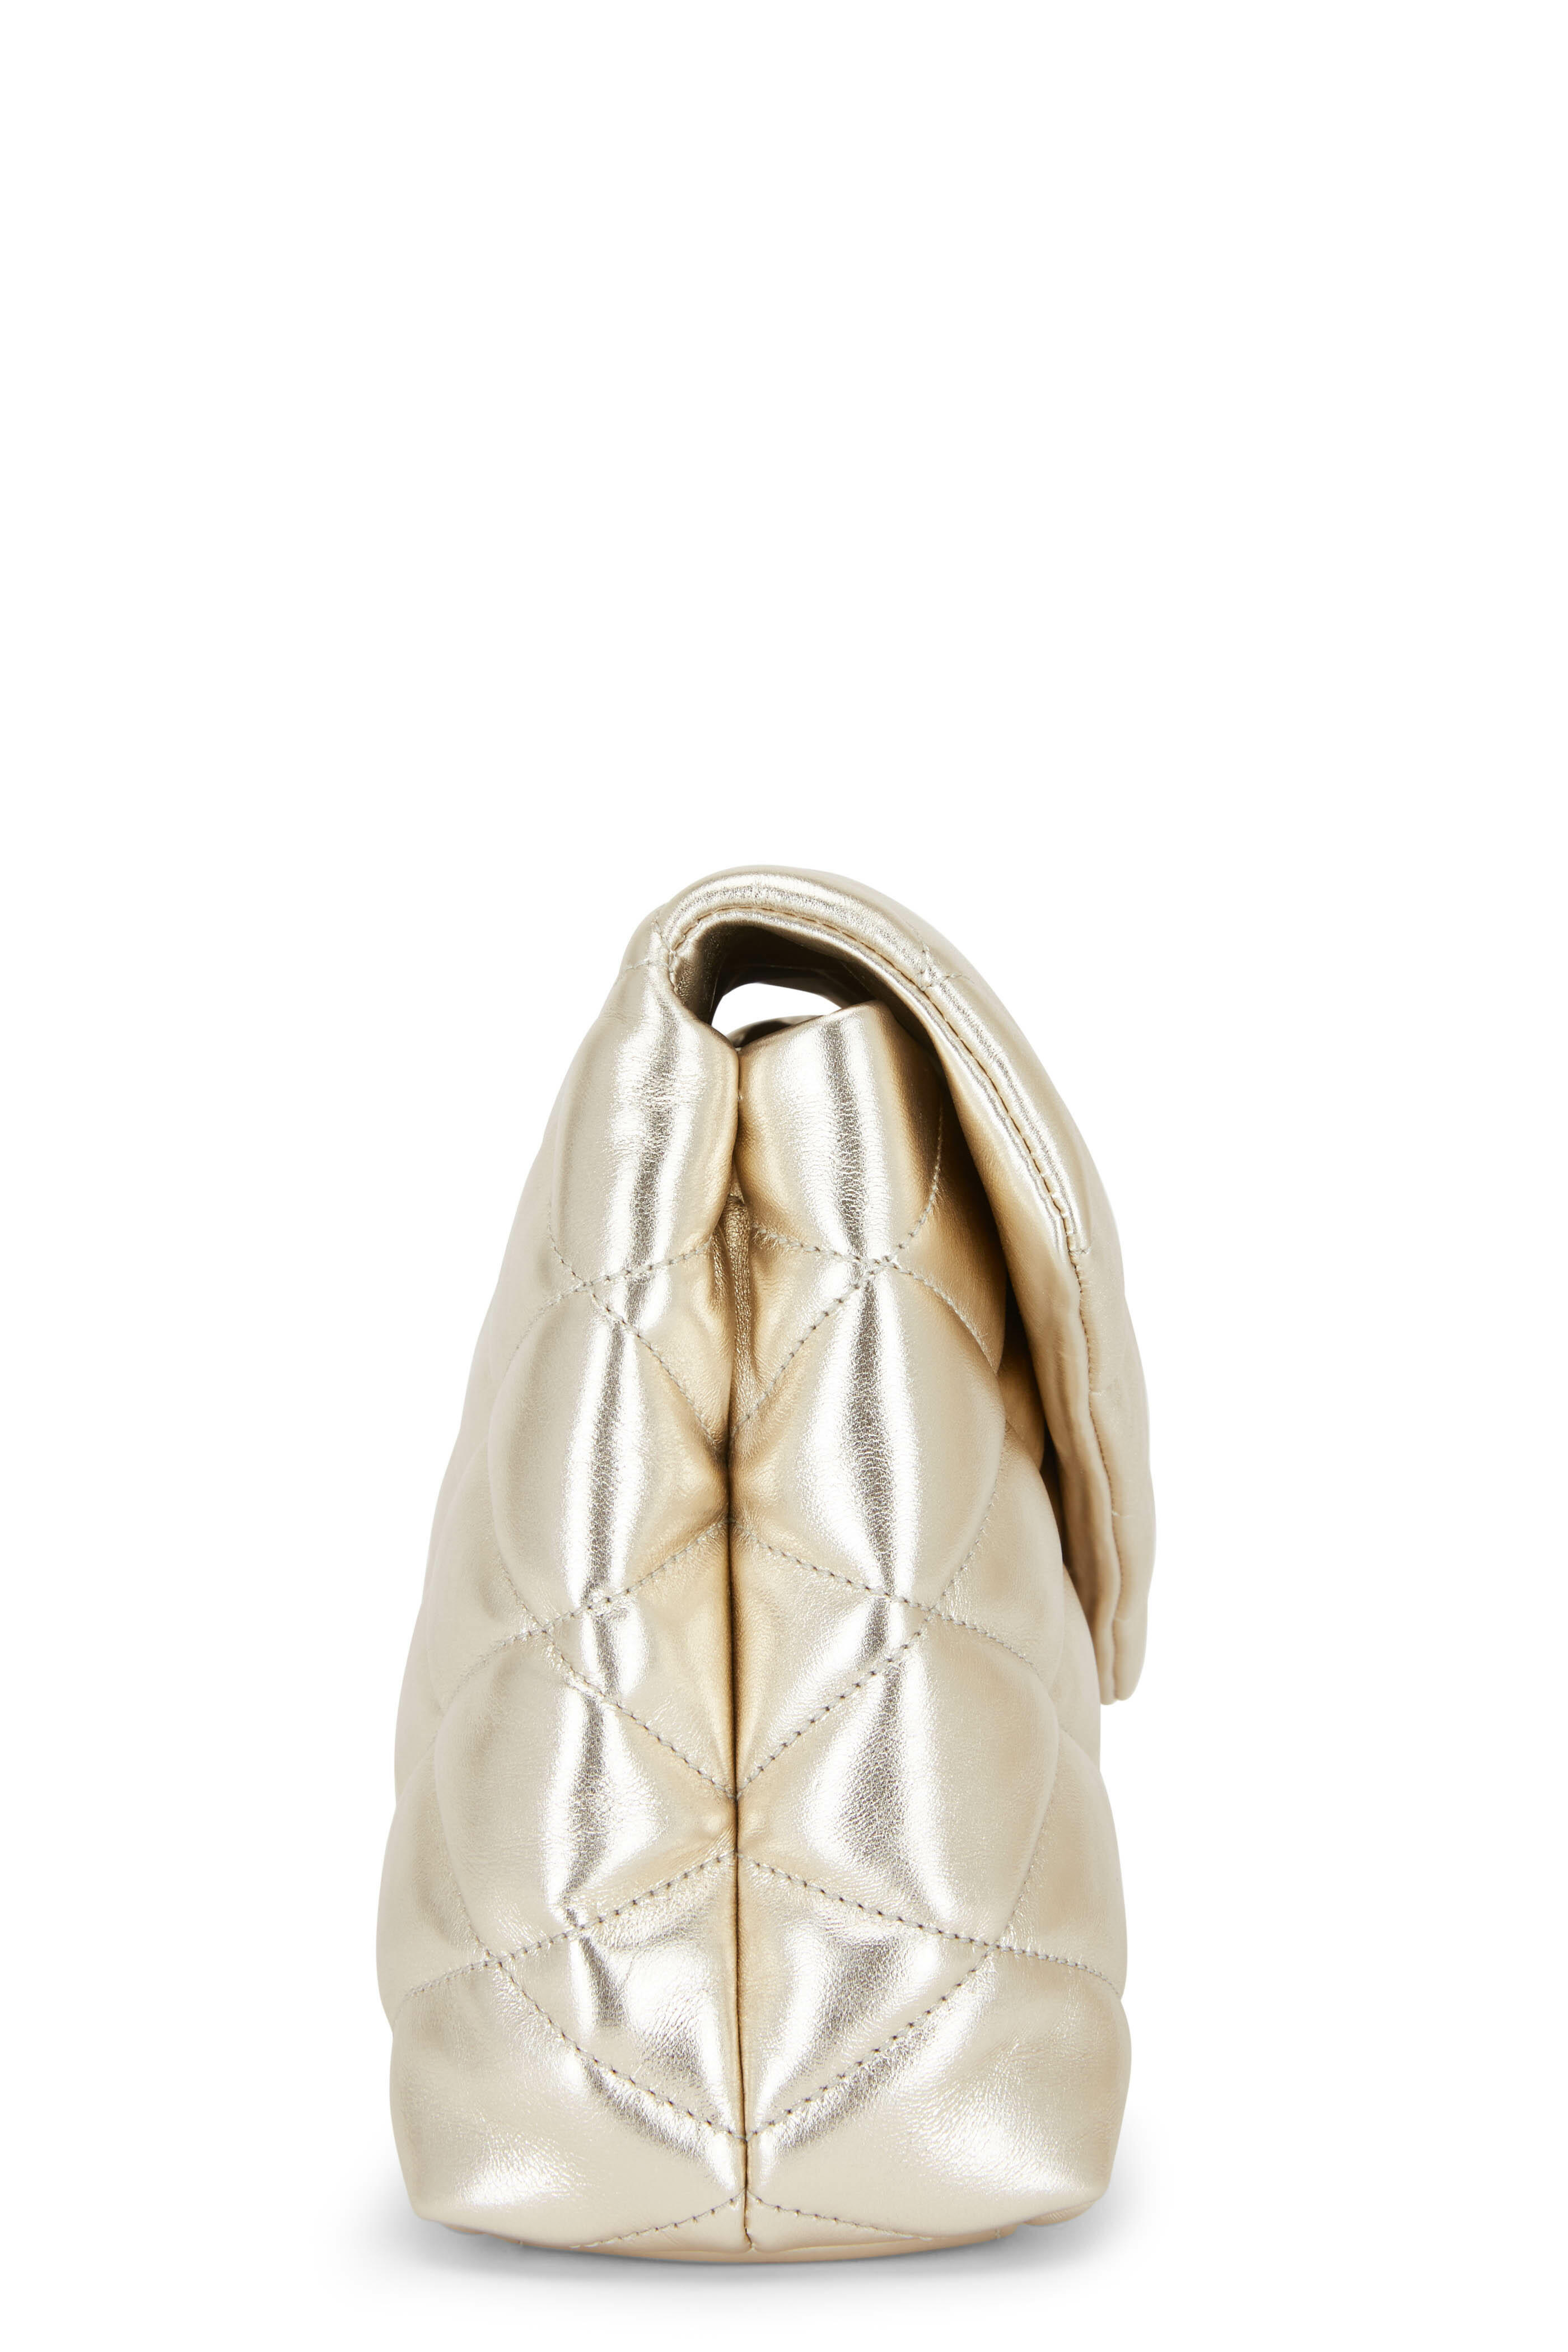 Saint Laurent Women's Uptown Pouch Vintage White Leather Envelope Clutch | by Mitchell Stores